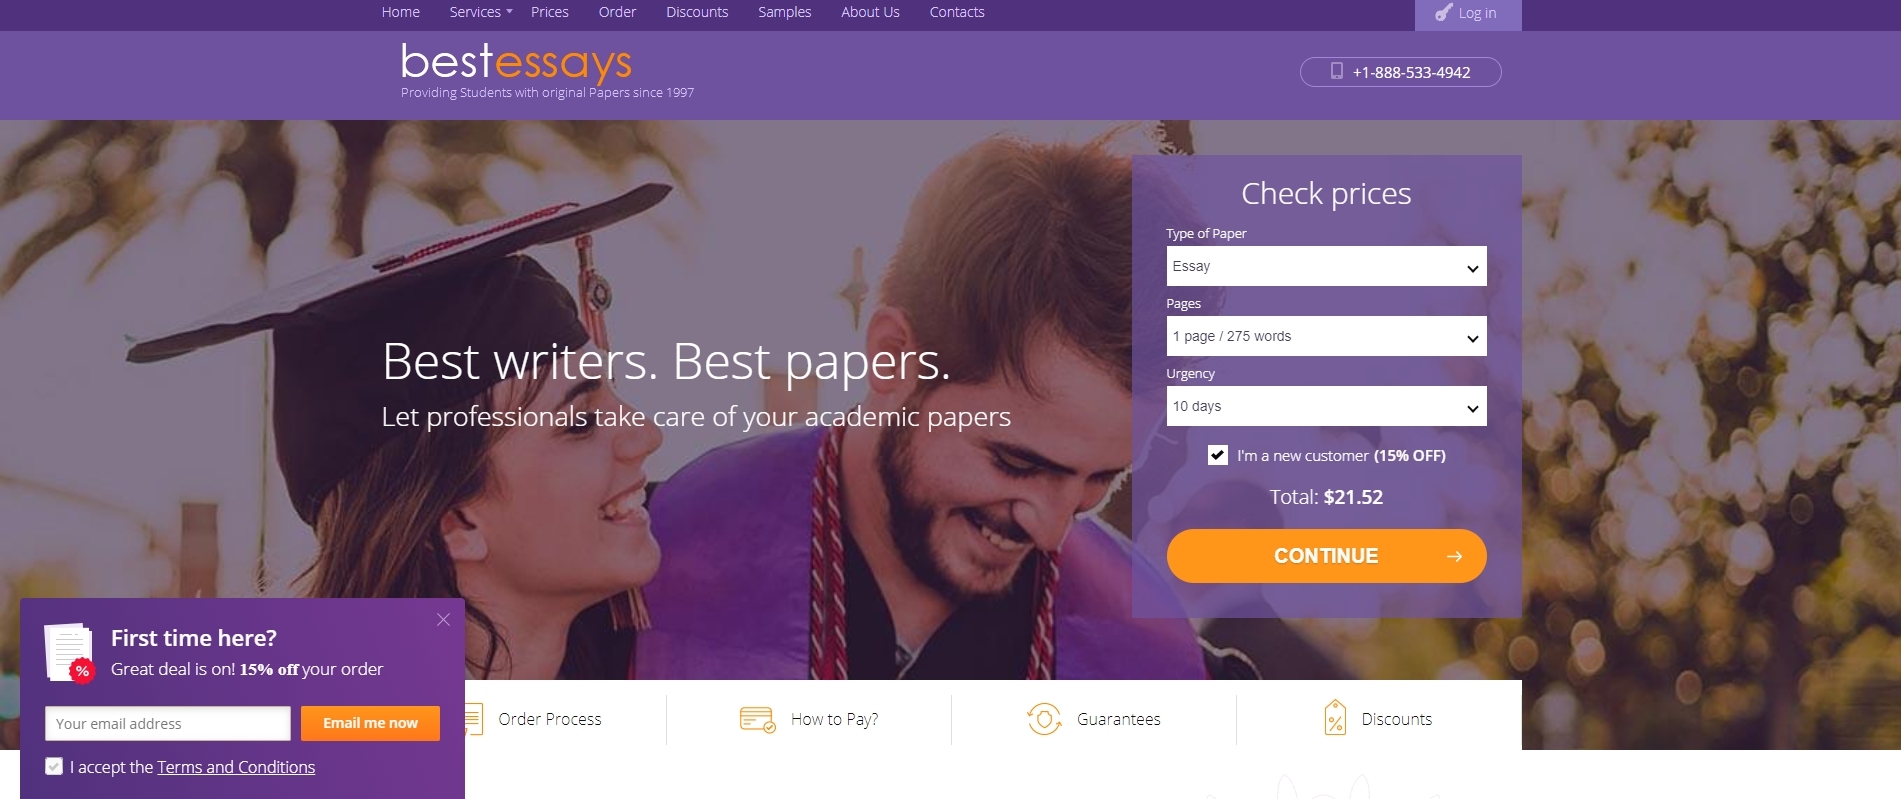 bestessays - Best Paper Writing Services